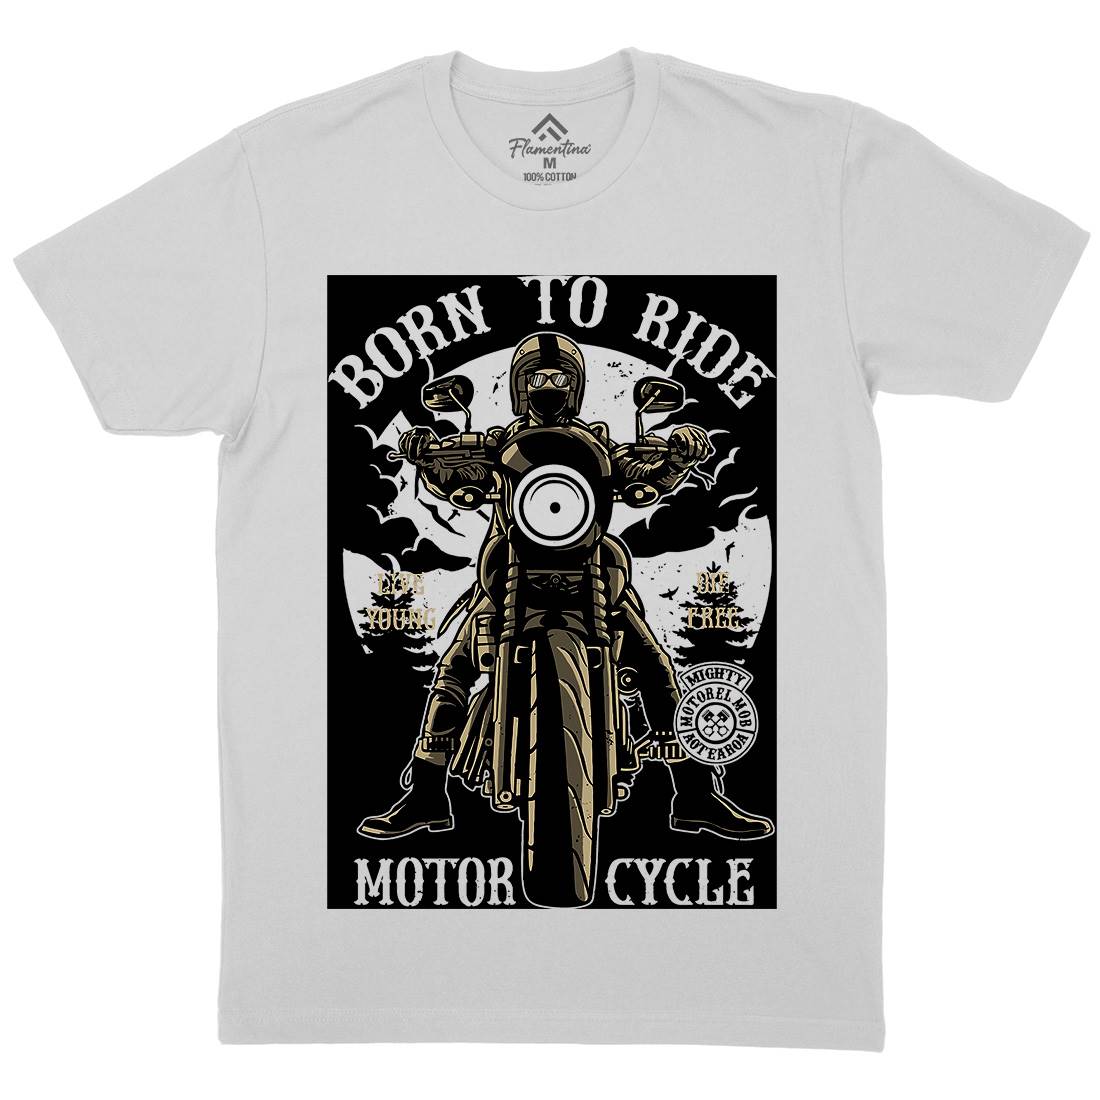 Born To Ride Mens Crew Neck T-Shirt Motorcycles A512